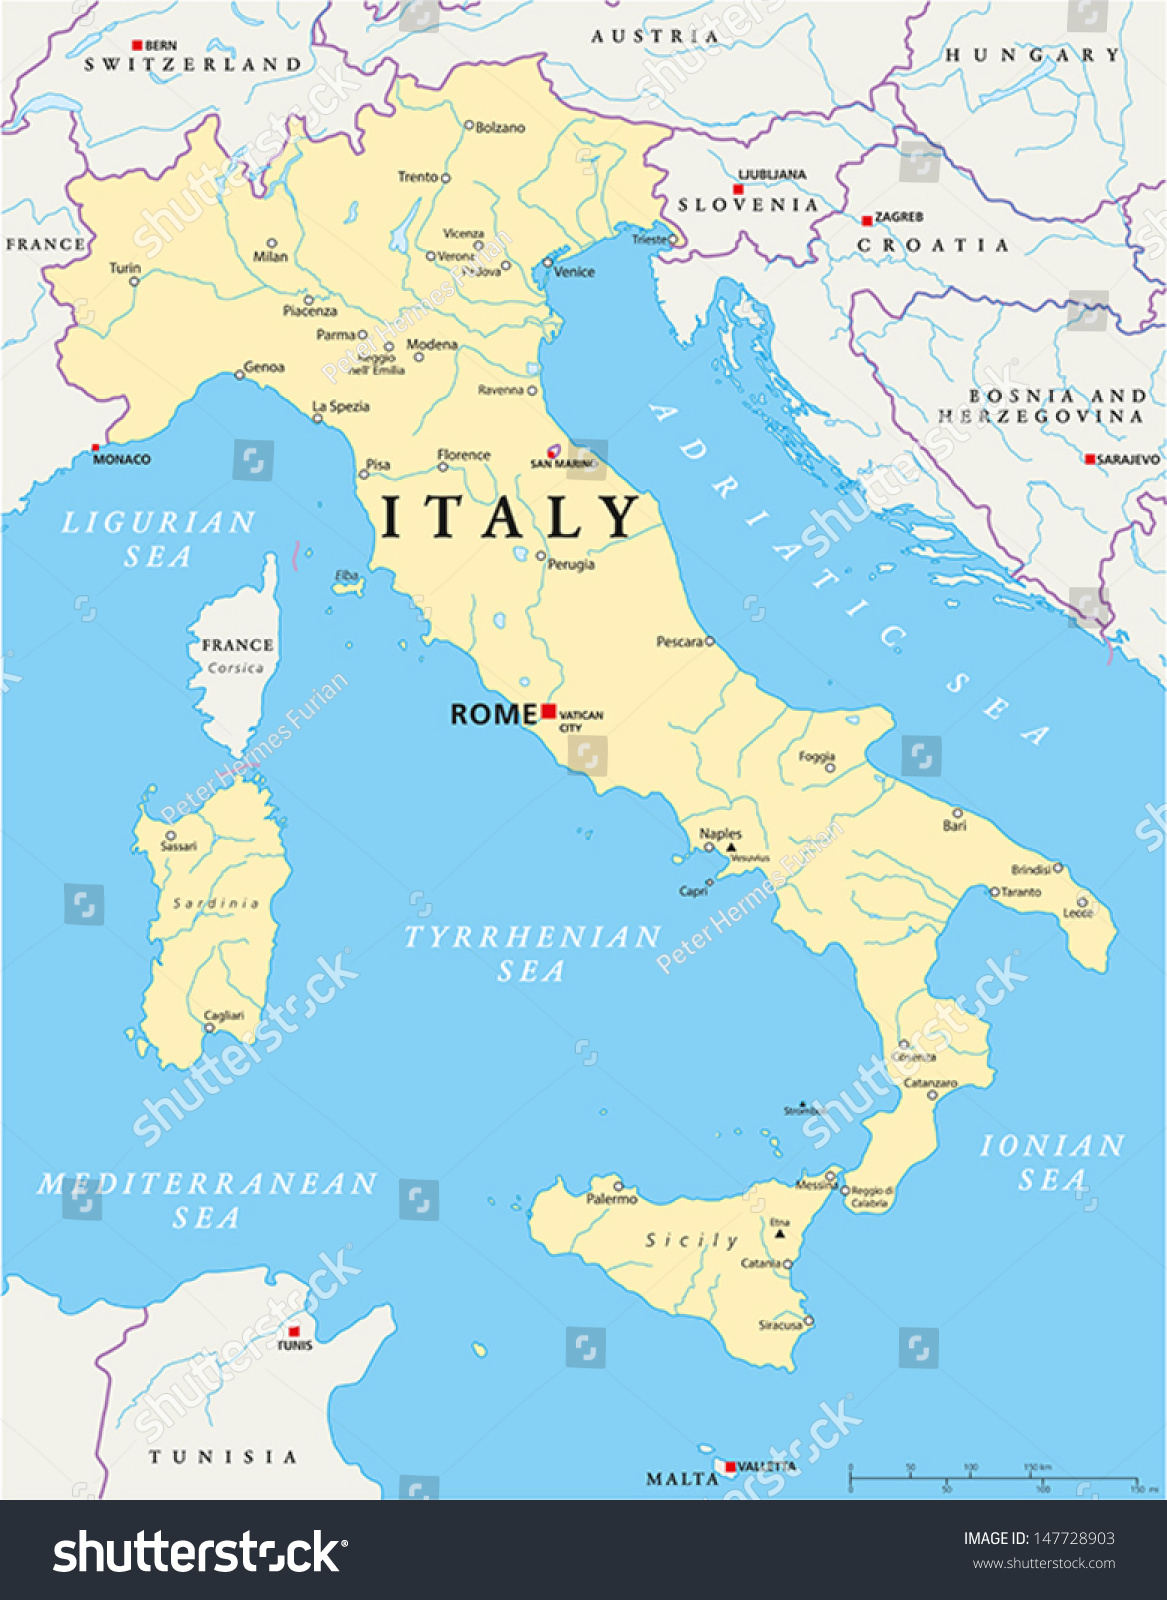 SVG of Italy Map - Hand drawn map of Italy with the capital Rome, the Vatican and San Marino, national borders, most important cities, rivers and lakes. Vector illustration with english labeling and scale. svg